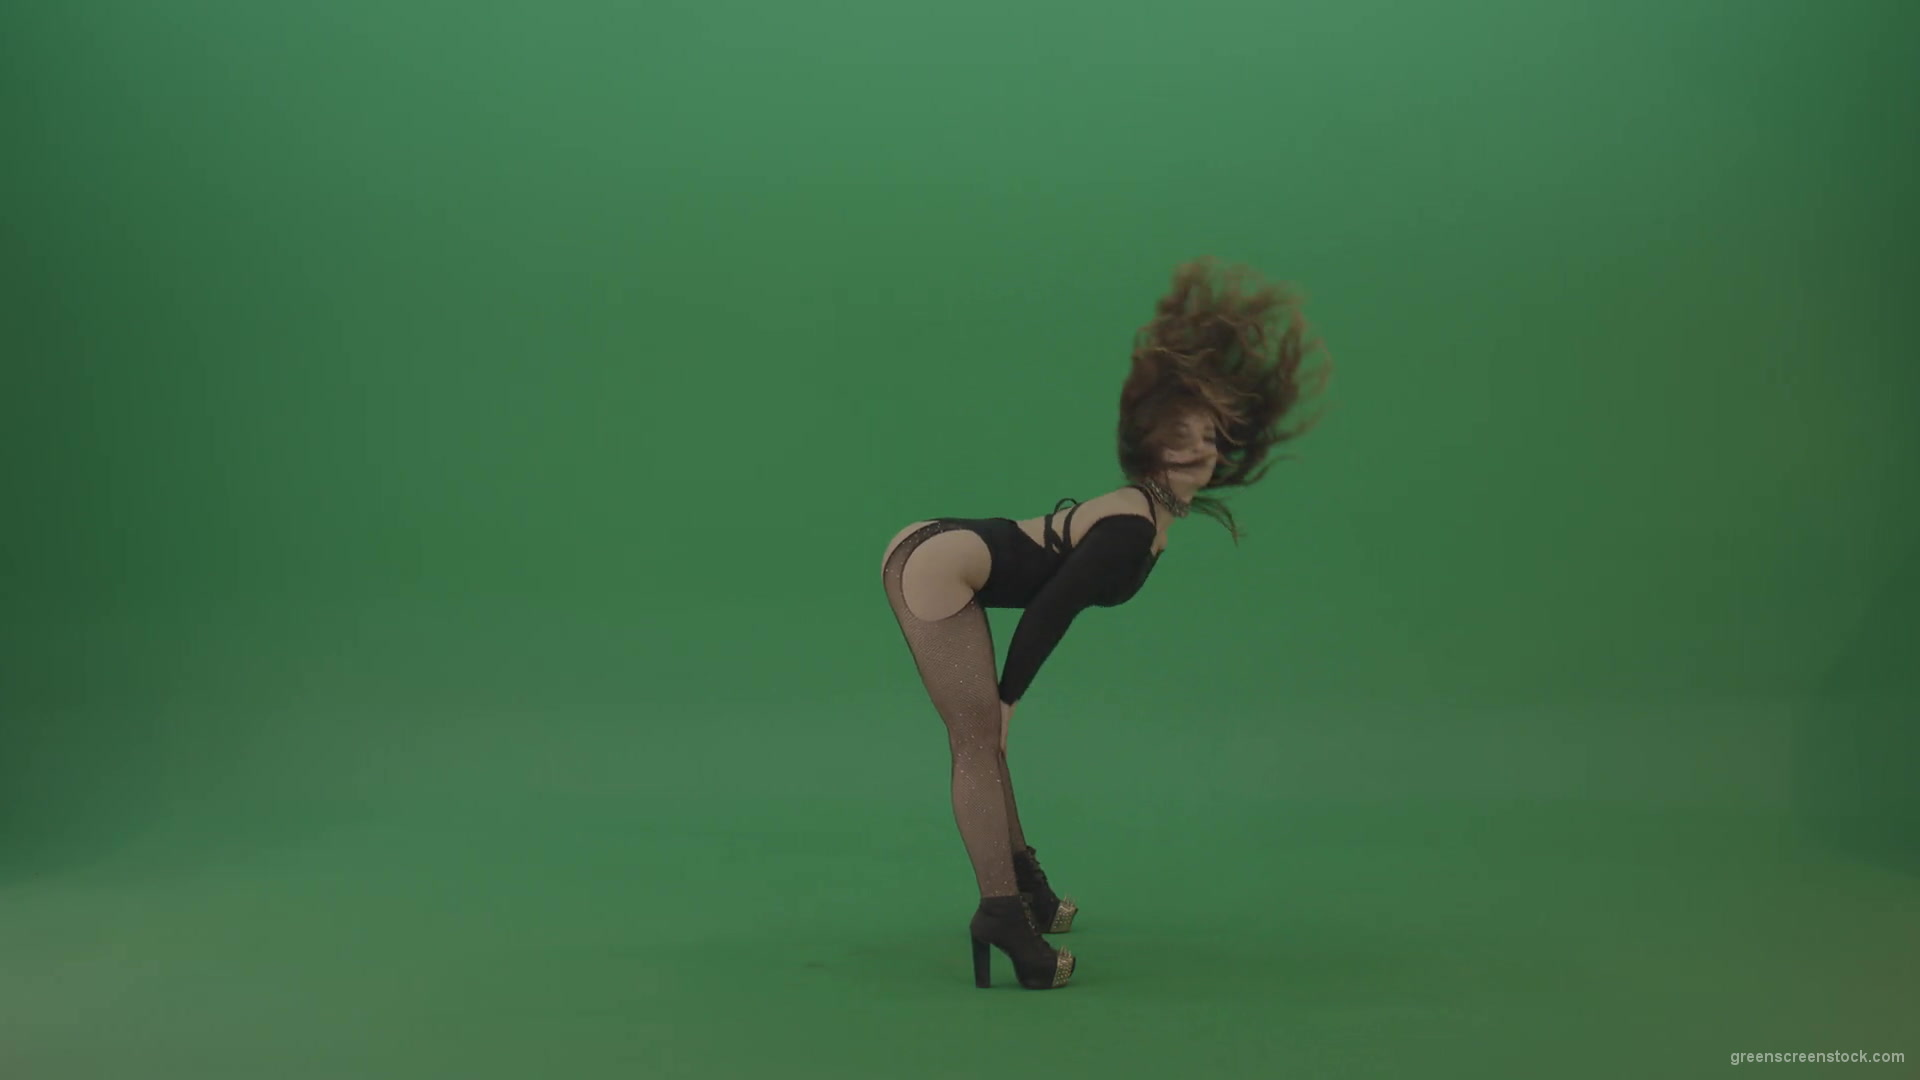 Beauty-girl-funny-shaking-the-ass-and-dancing-isolated-on-green-screen-1920_009 Green Screen Stock